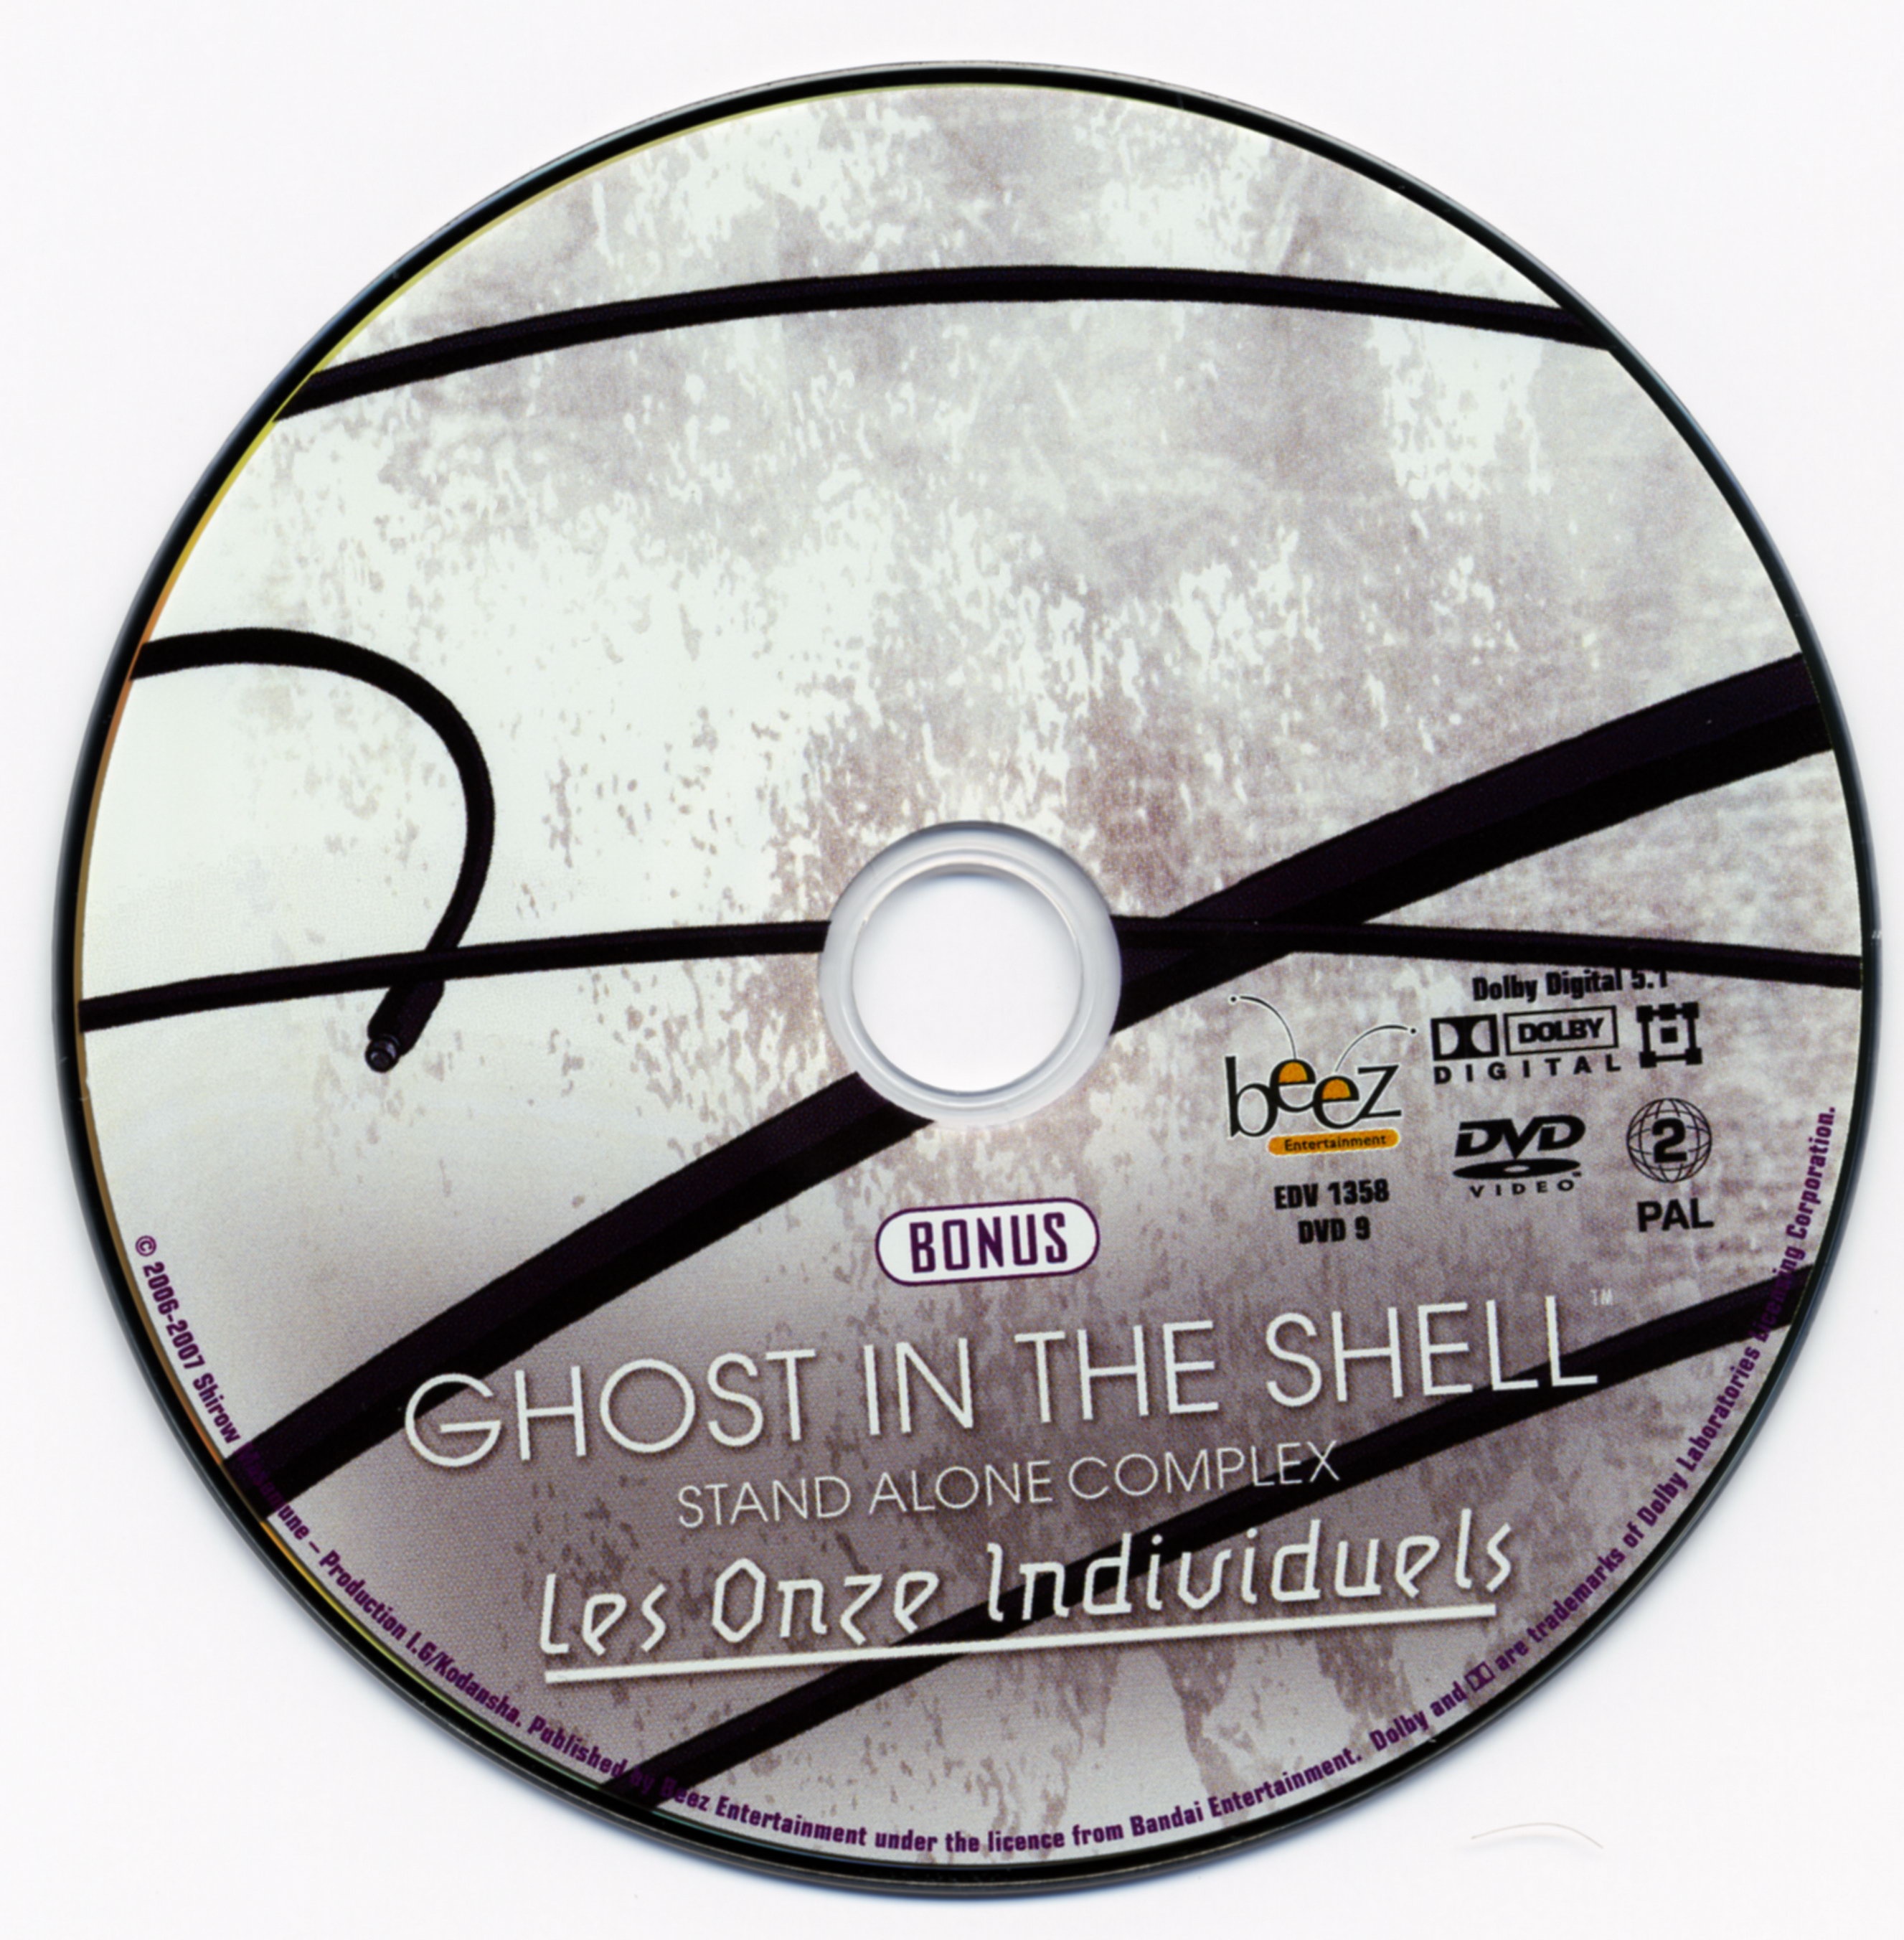 Ghost in the shell stand alone complexe les onze individuels DISC 2